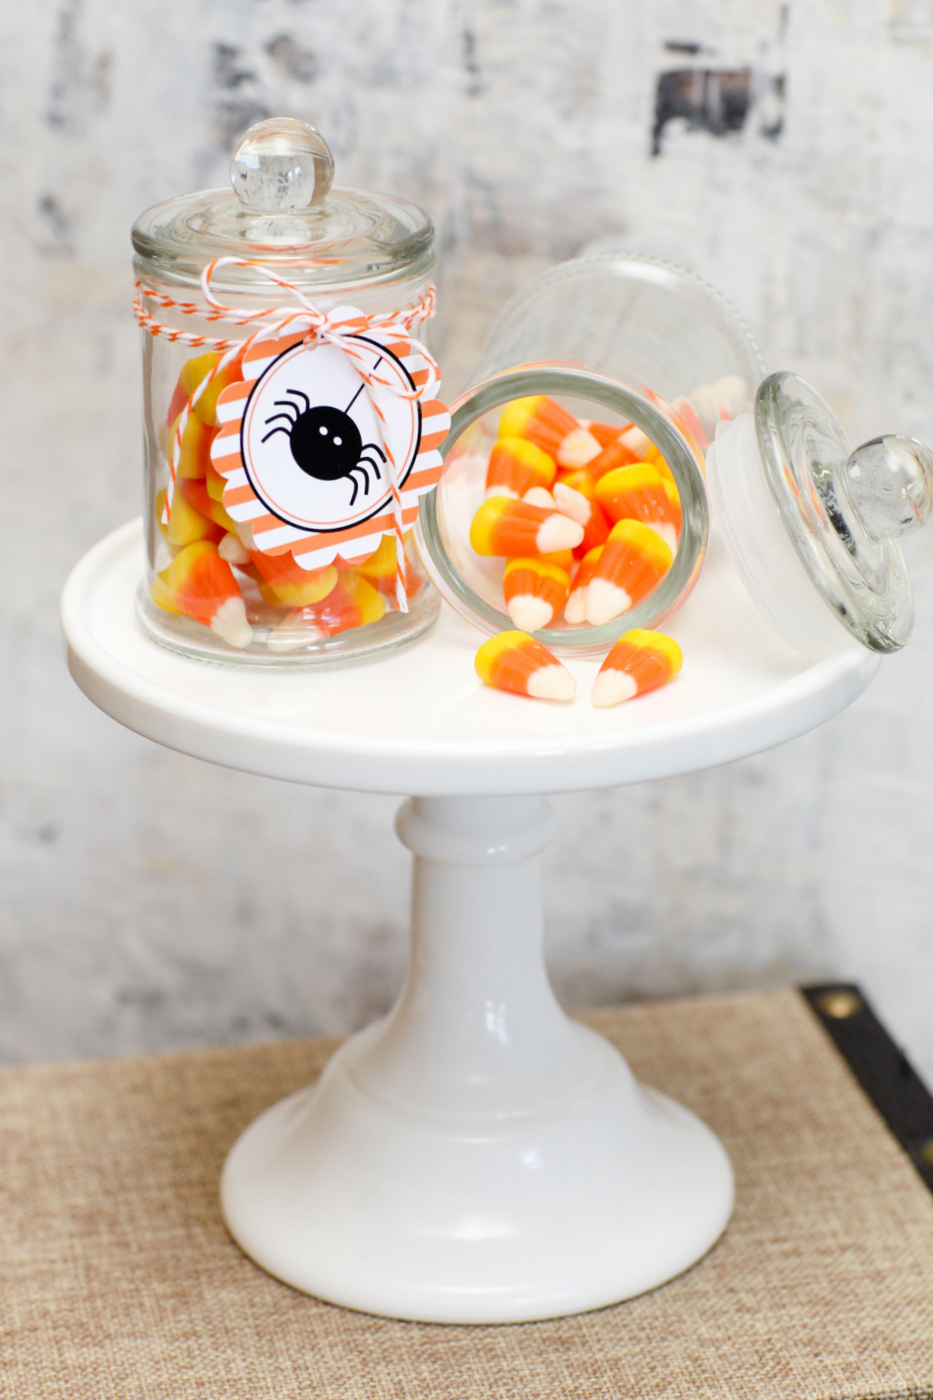 Halloween Candy Jars | The TomKat Studio - Find these adorable mini glass jars in our shop! shoptomkat.com